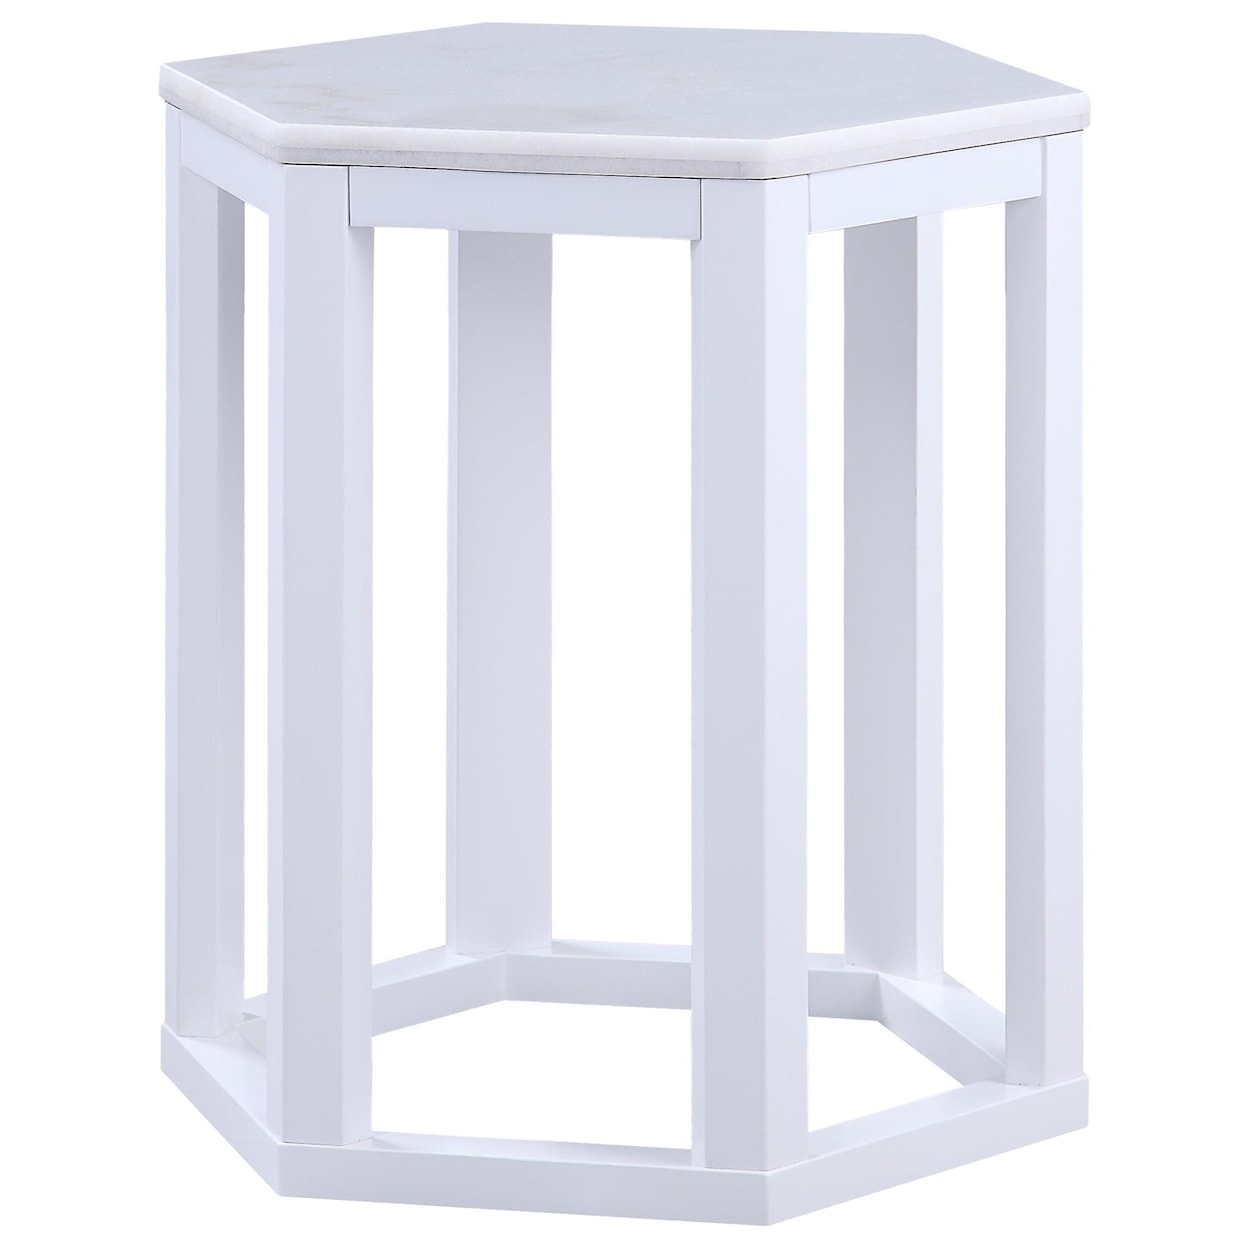 Acme Furniture Reon 2-Pack of End Tables